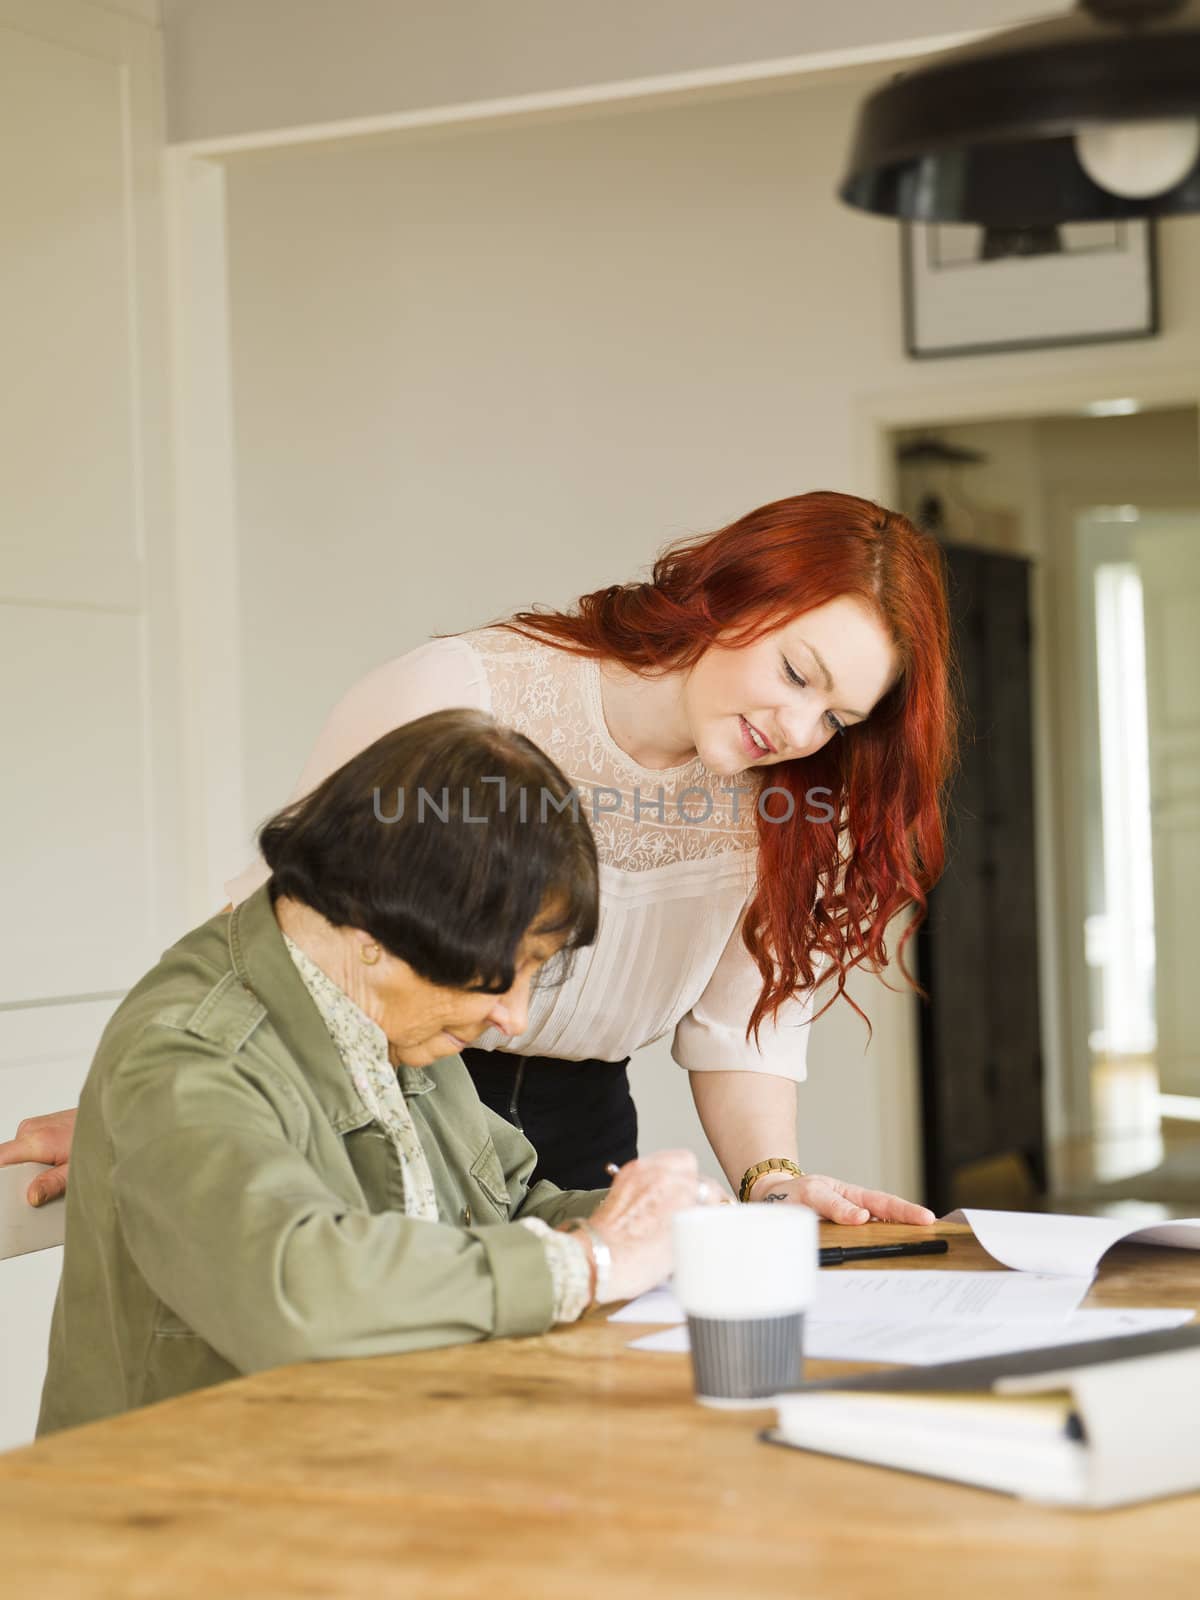 Young woman helping her Grandmother with paperwork